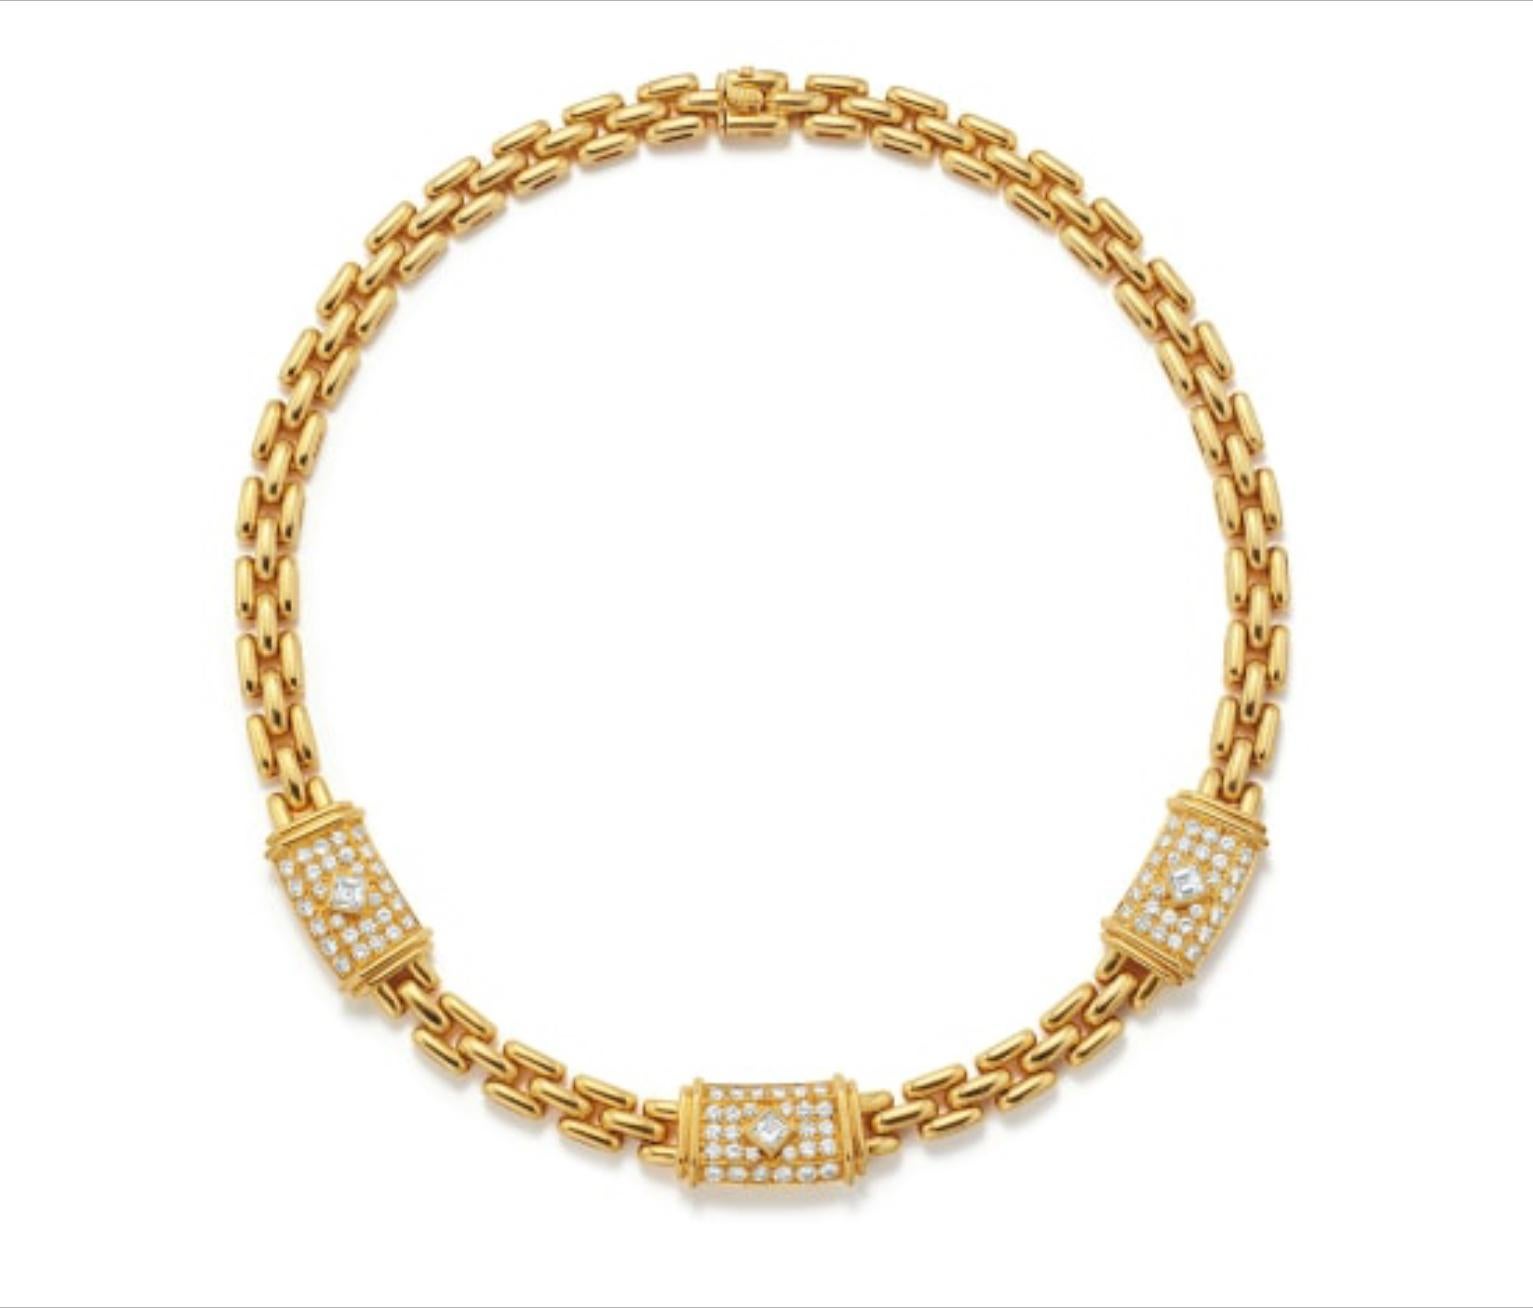 
A chic 18 karat yellow gold “Maillon” necklace by Cartier, embellished with round brilliant-cut diamonds. Made in France. Length approximately 15.50 inches.